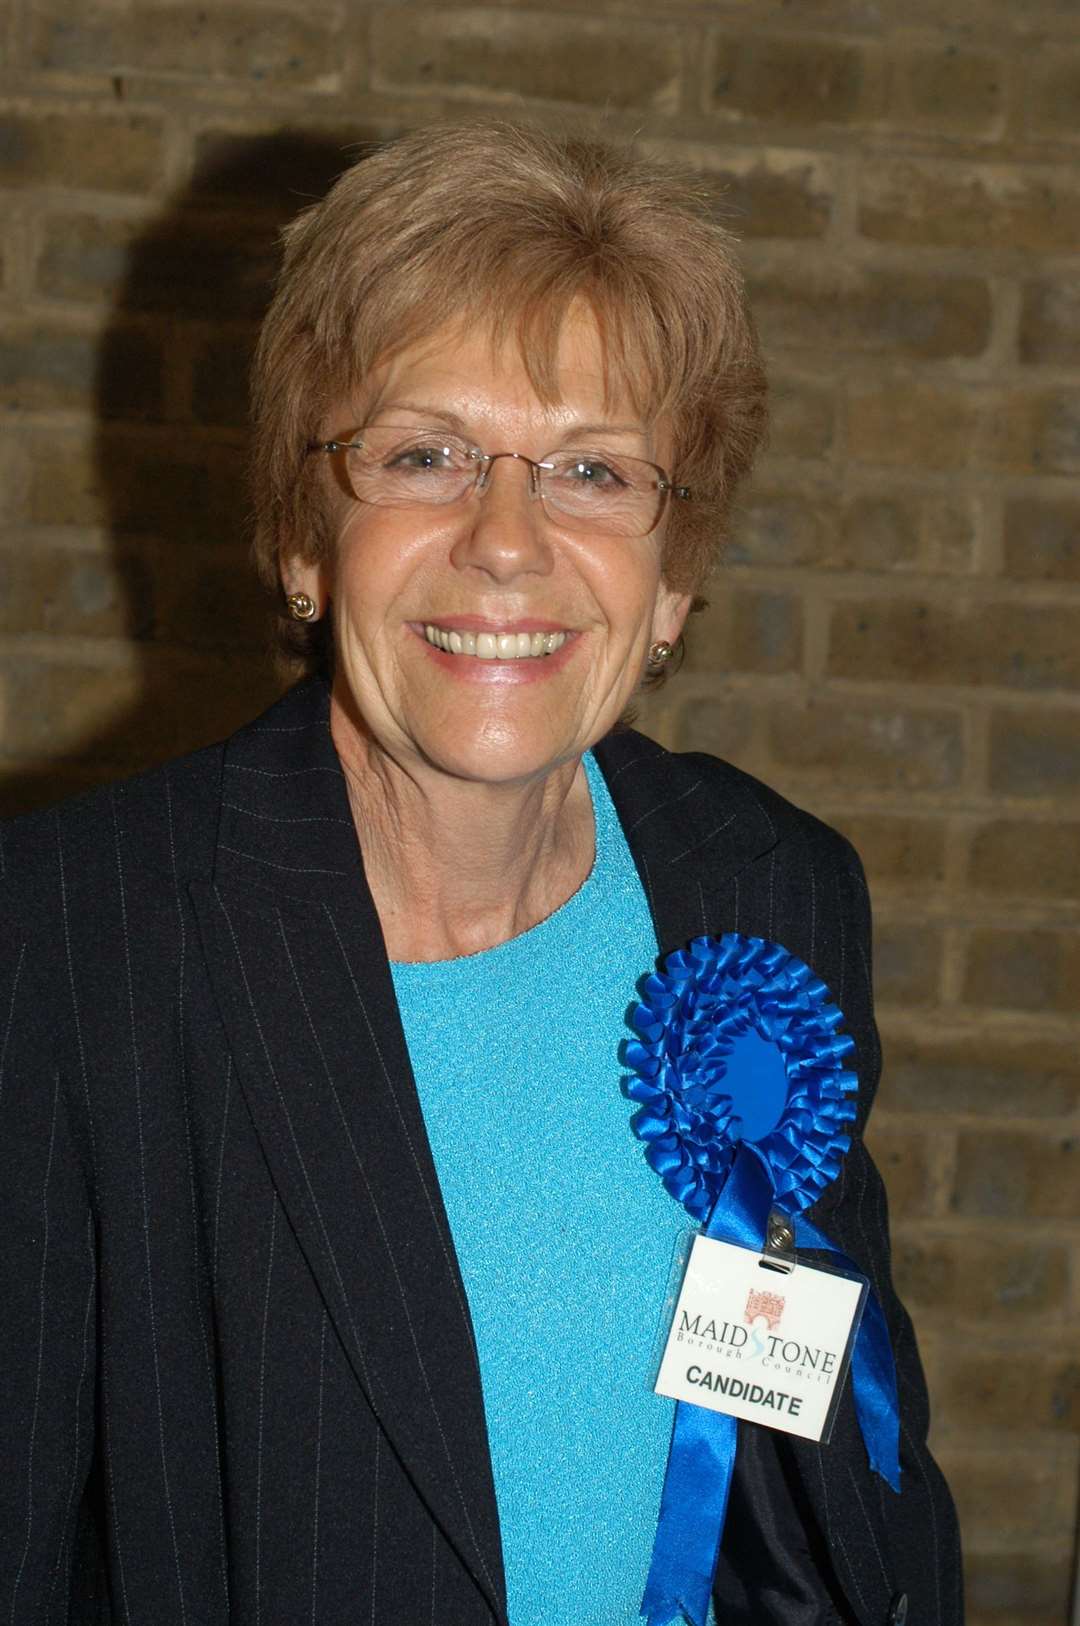 Cllr Wendy Hinder when she was first elected to Maidstone Borough Council in 2004